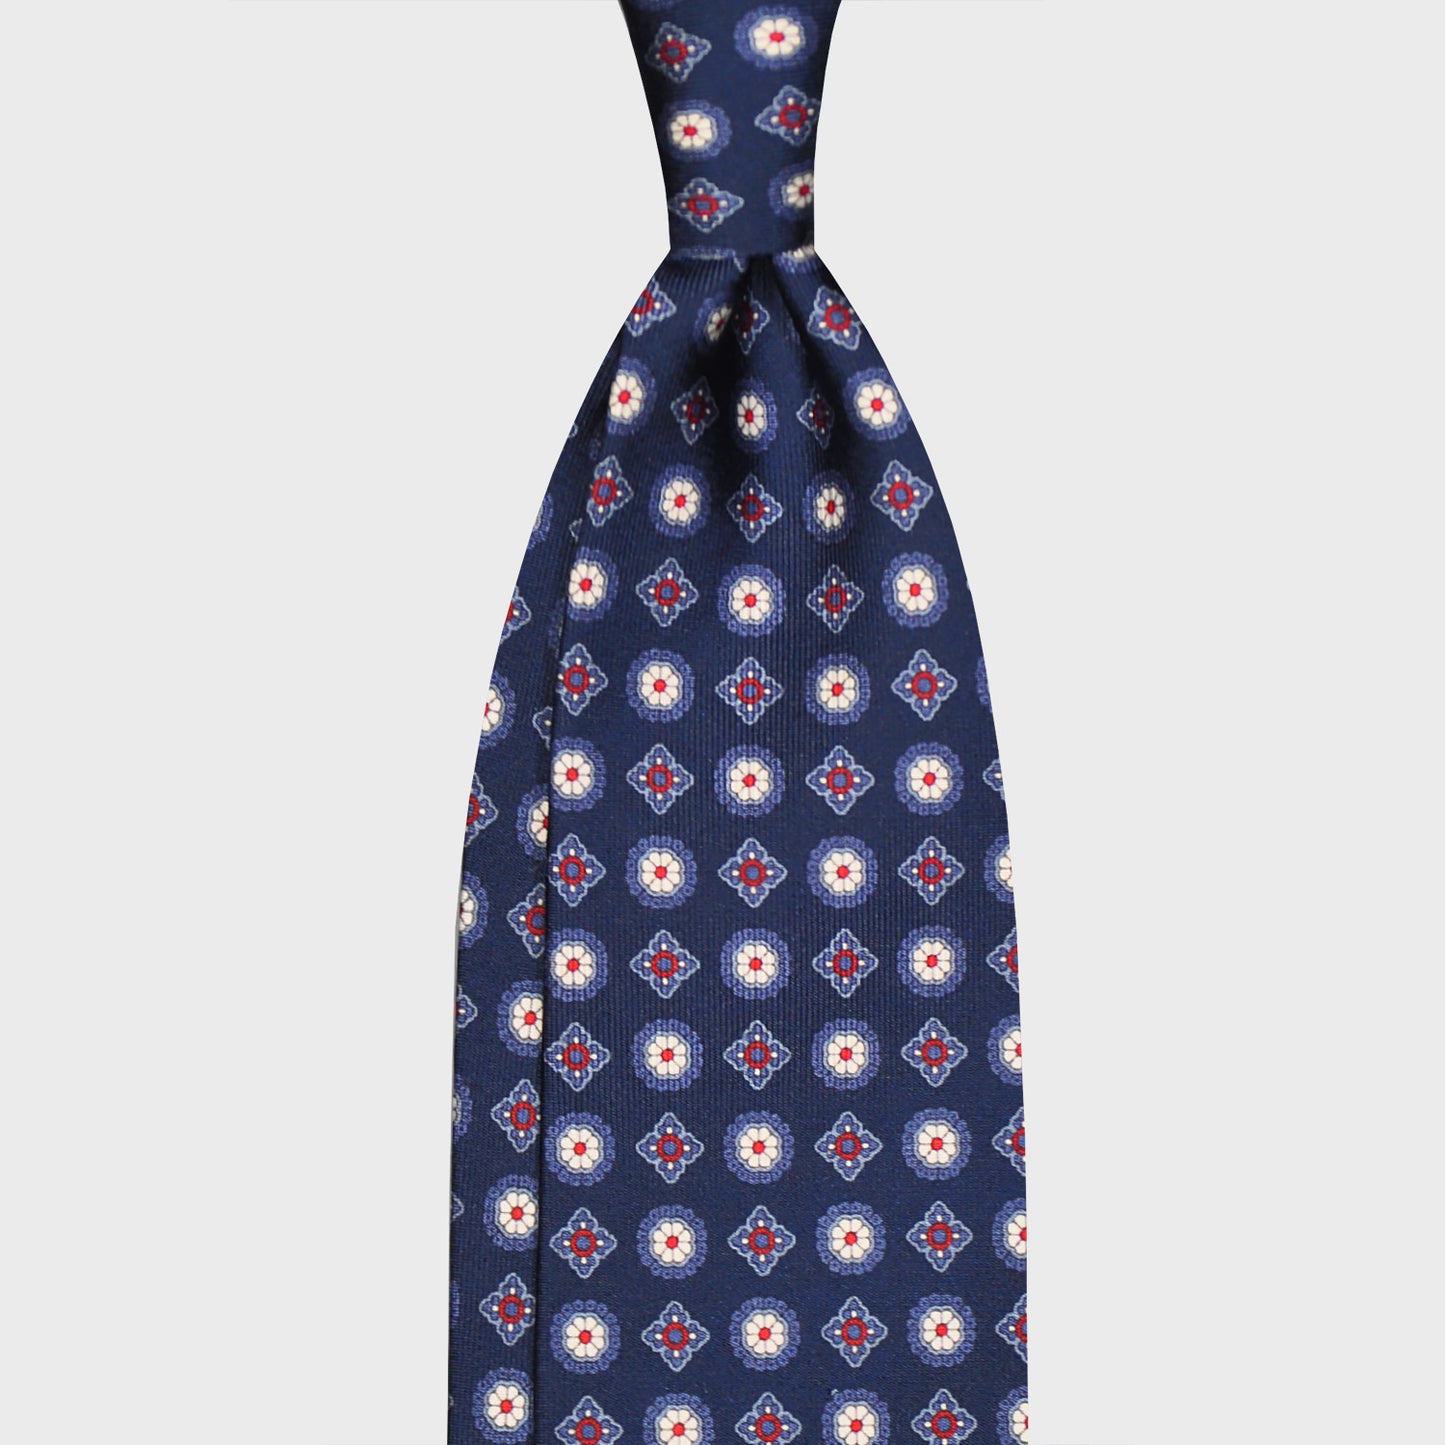 Load image into Gallery viewer, F.Marino Silk Tie 3 Folds Classic Fantasy Bluewood-Wools Boutique Uomo
